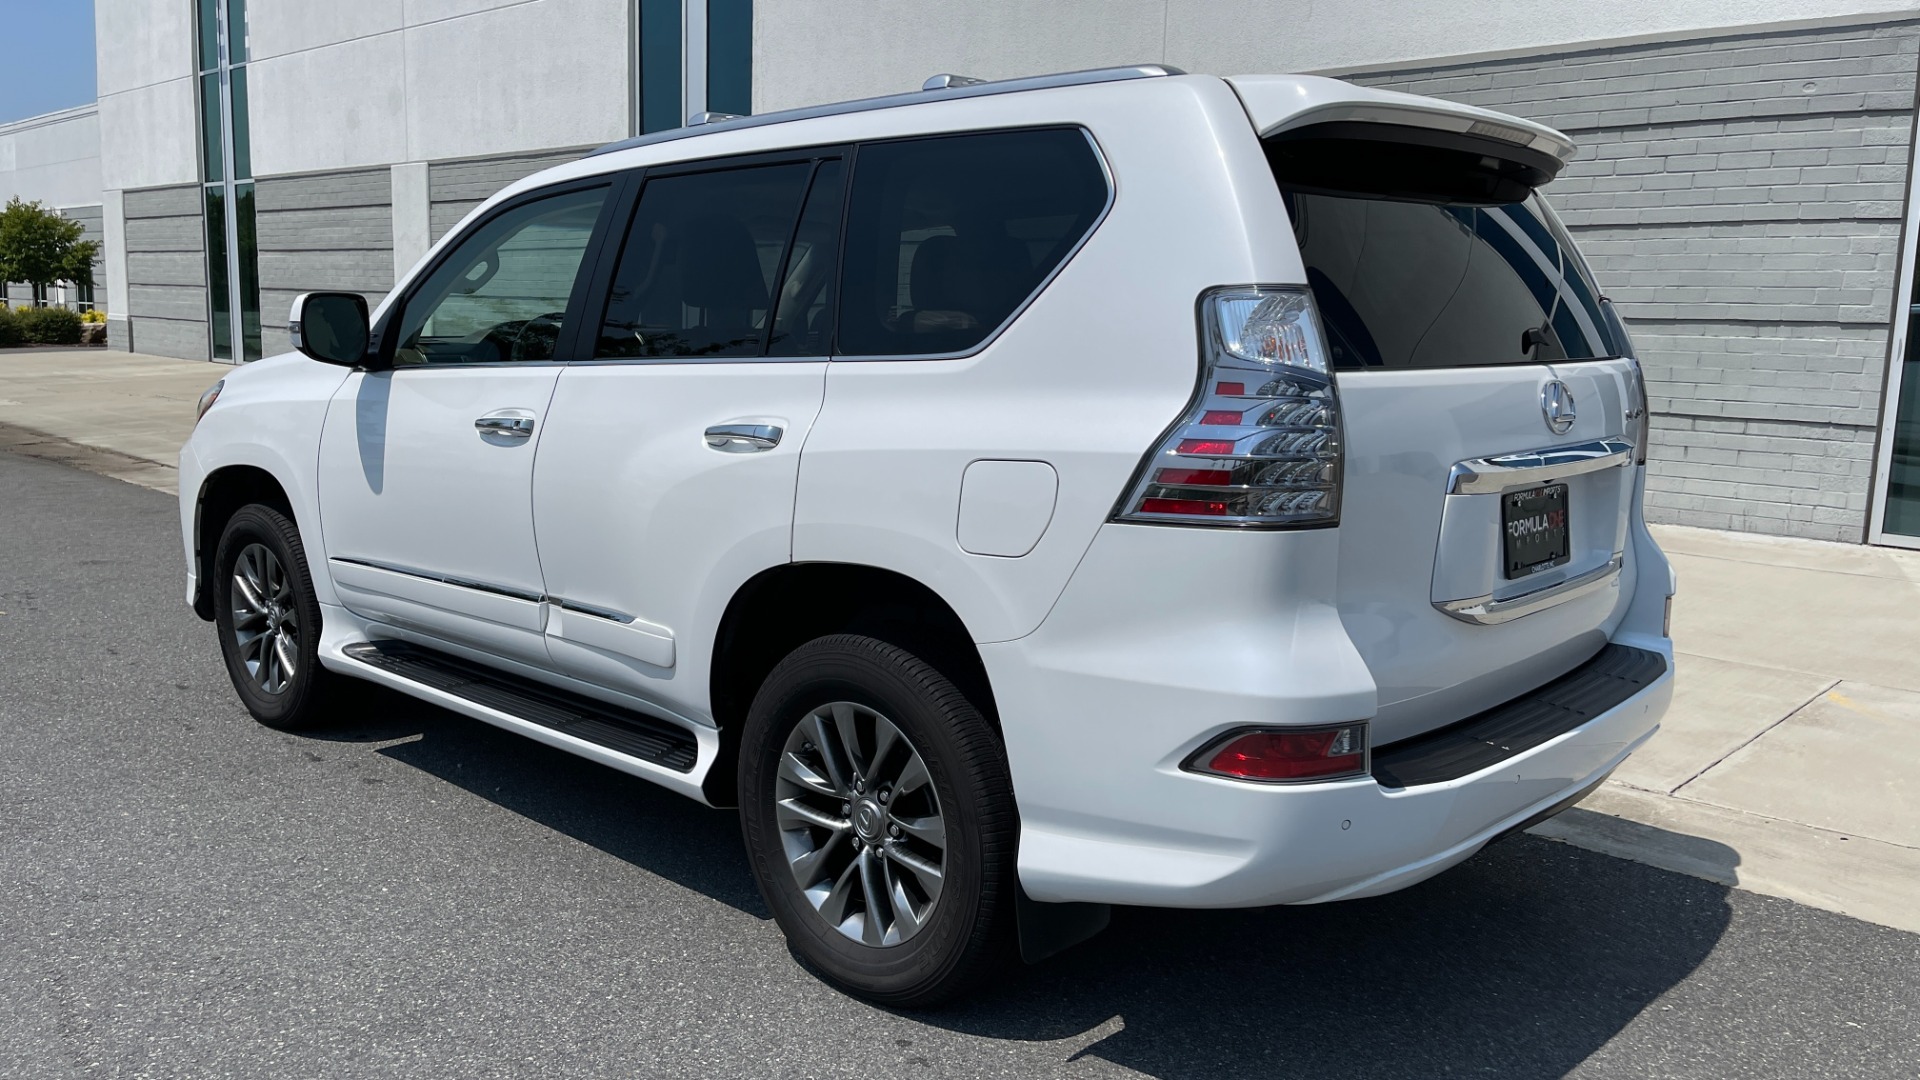 Used 2015 Lexus GX 460 LUXURY / 4.6L V8 / 4WD / NAV / SUNROOF / 3-ROW / REARVIEW for sale Sold at Formula Imports in Charlotte NC 28227 5